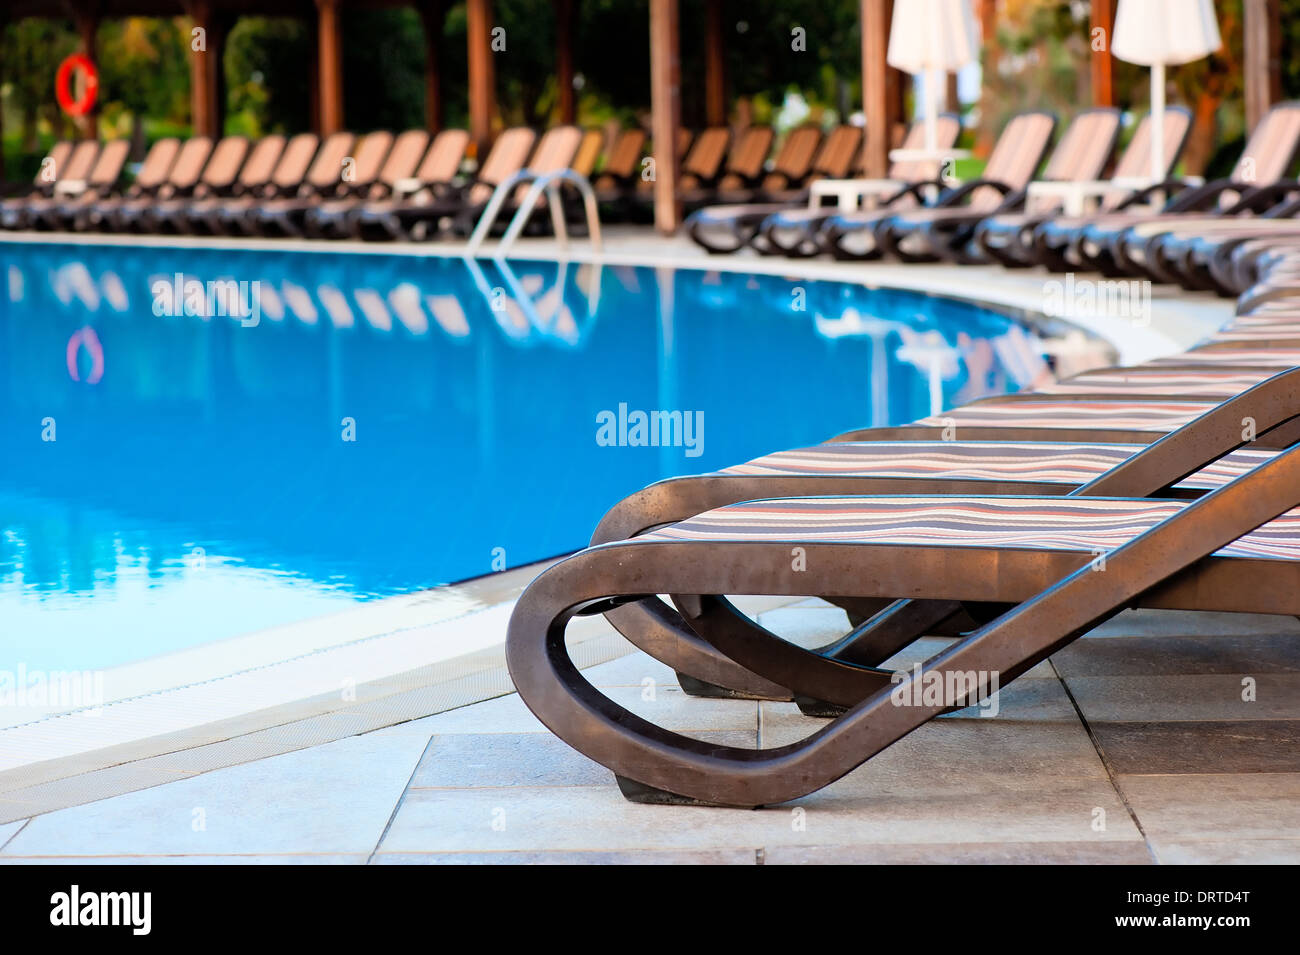 empty sun loungers for sunbathing and swimming pool Stock Photo